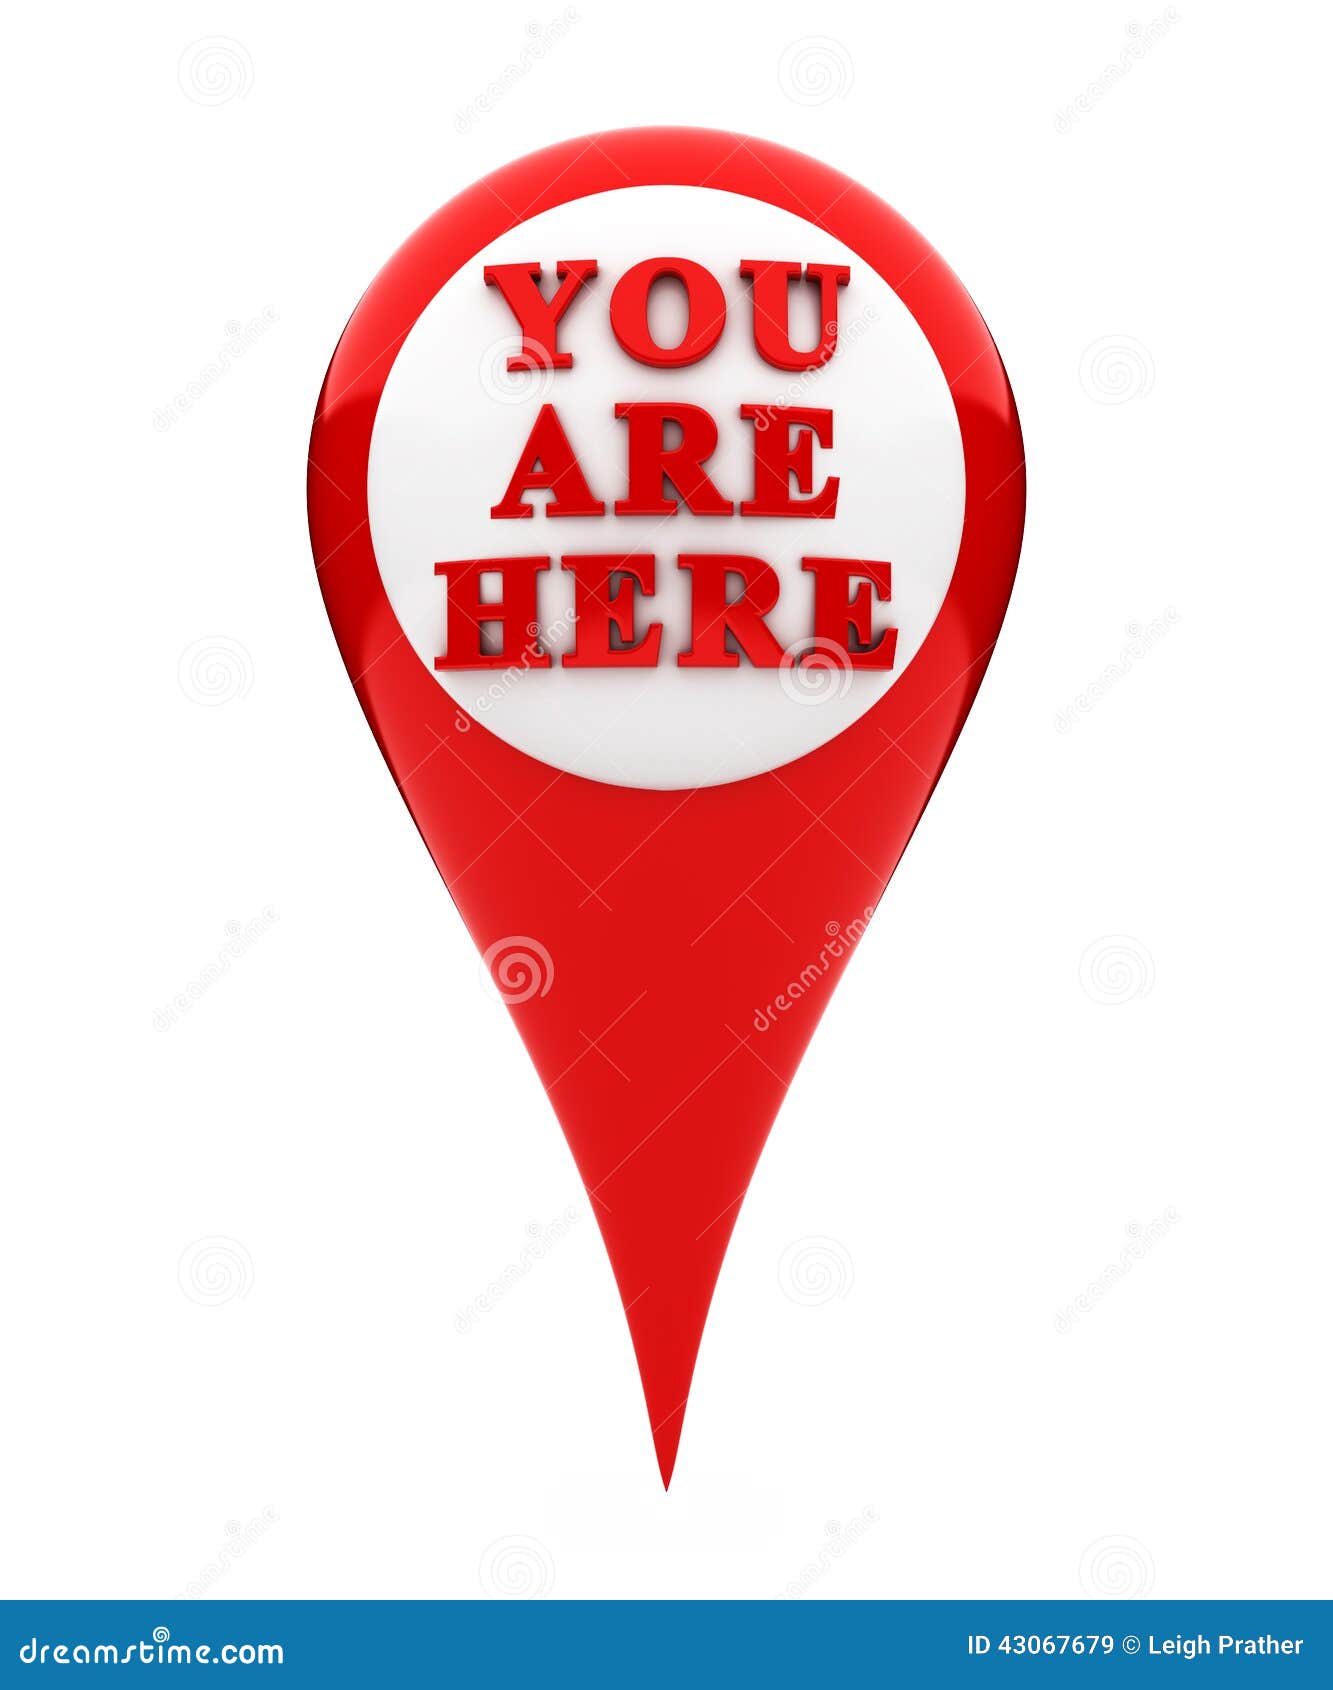 clipart you are here - photo #3